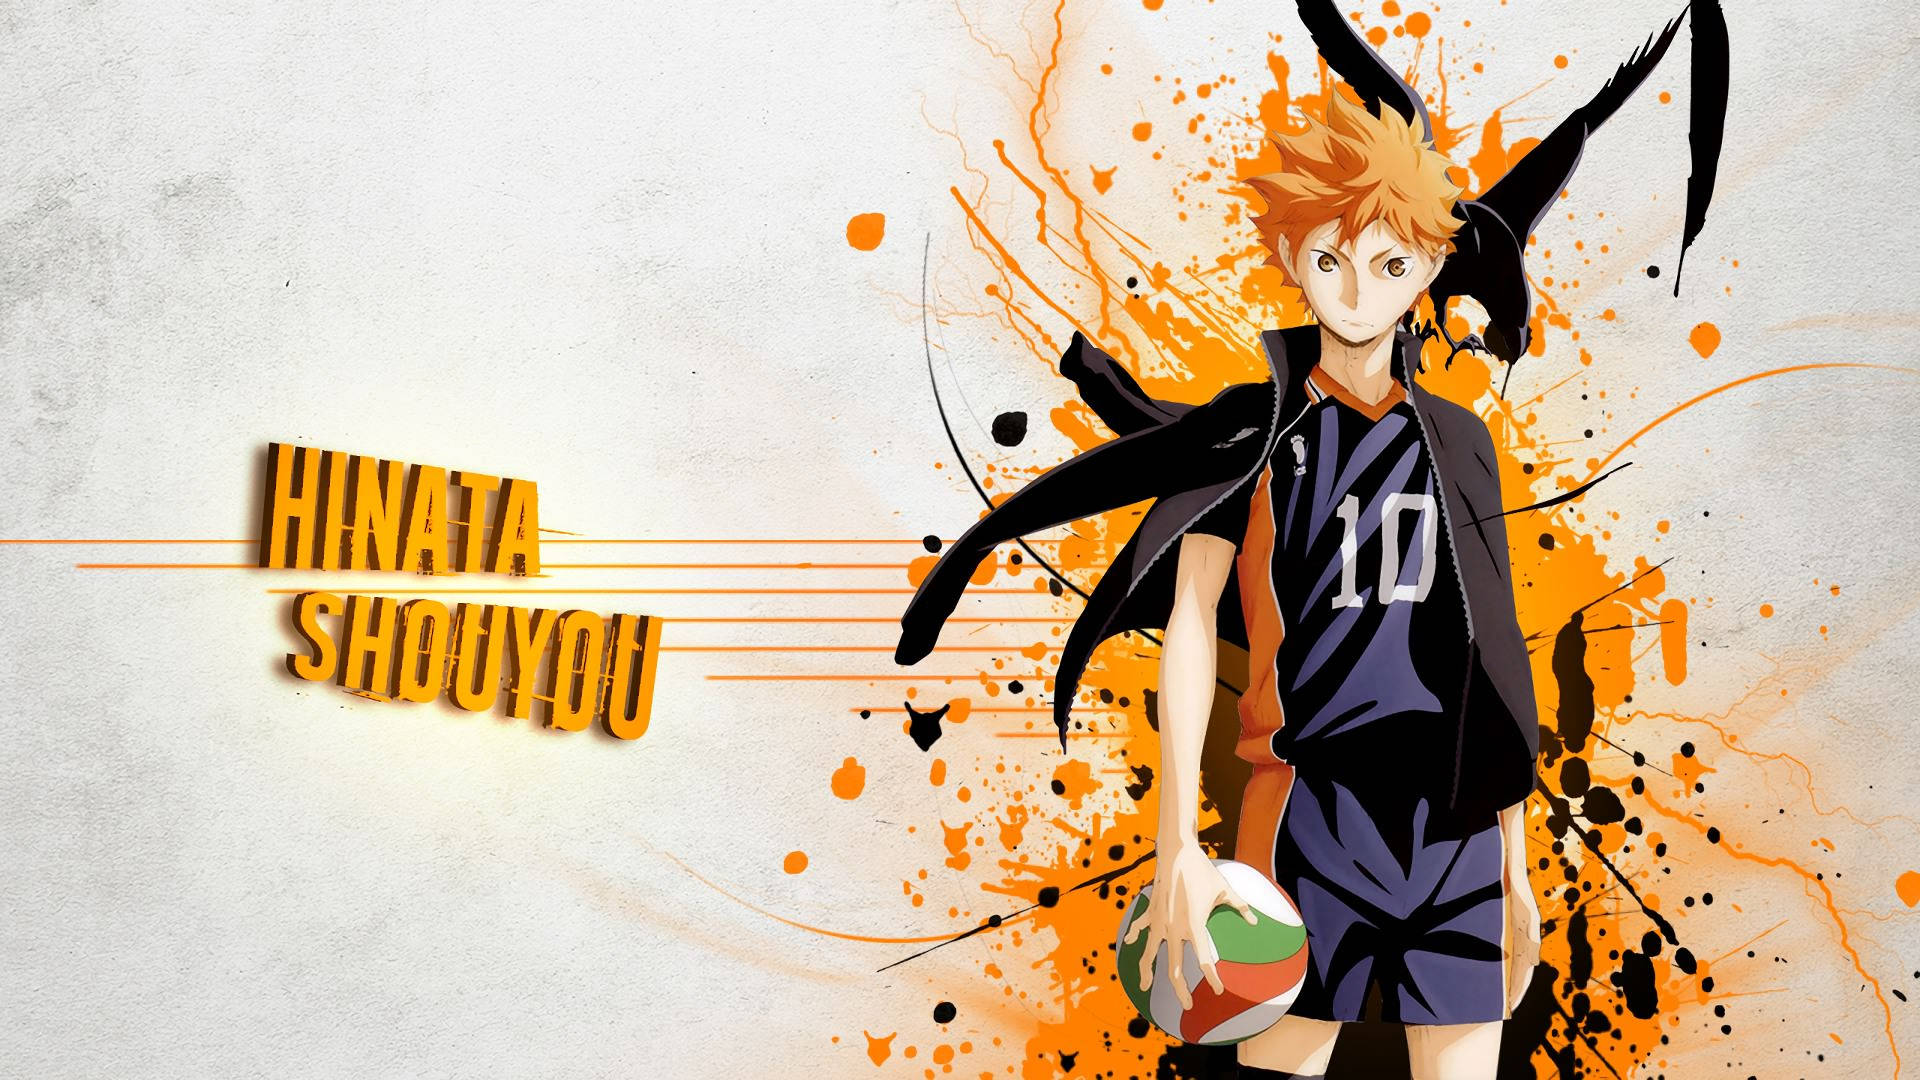 Haikyuu One-Shot Release Date & Story Revealed! Will Introduce The Main Cast